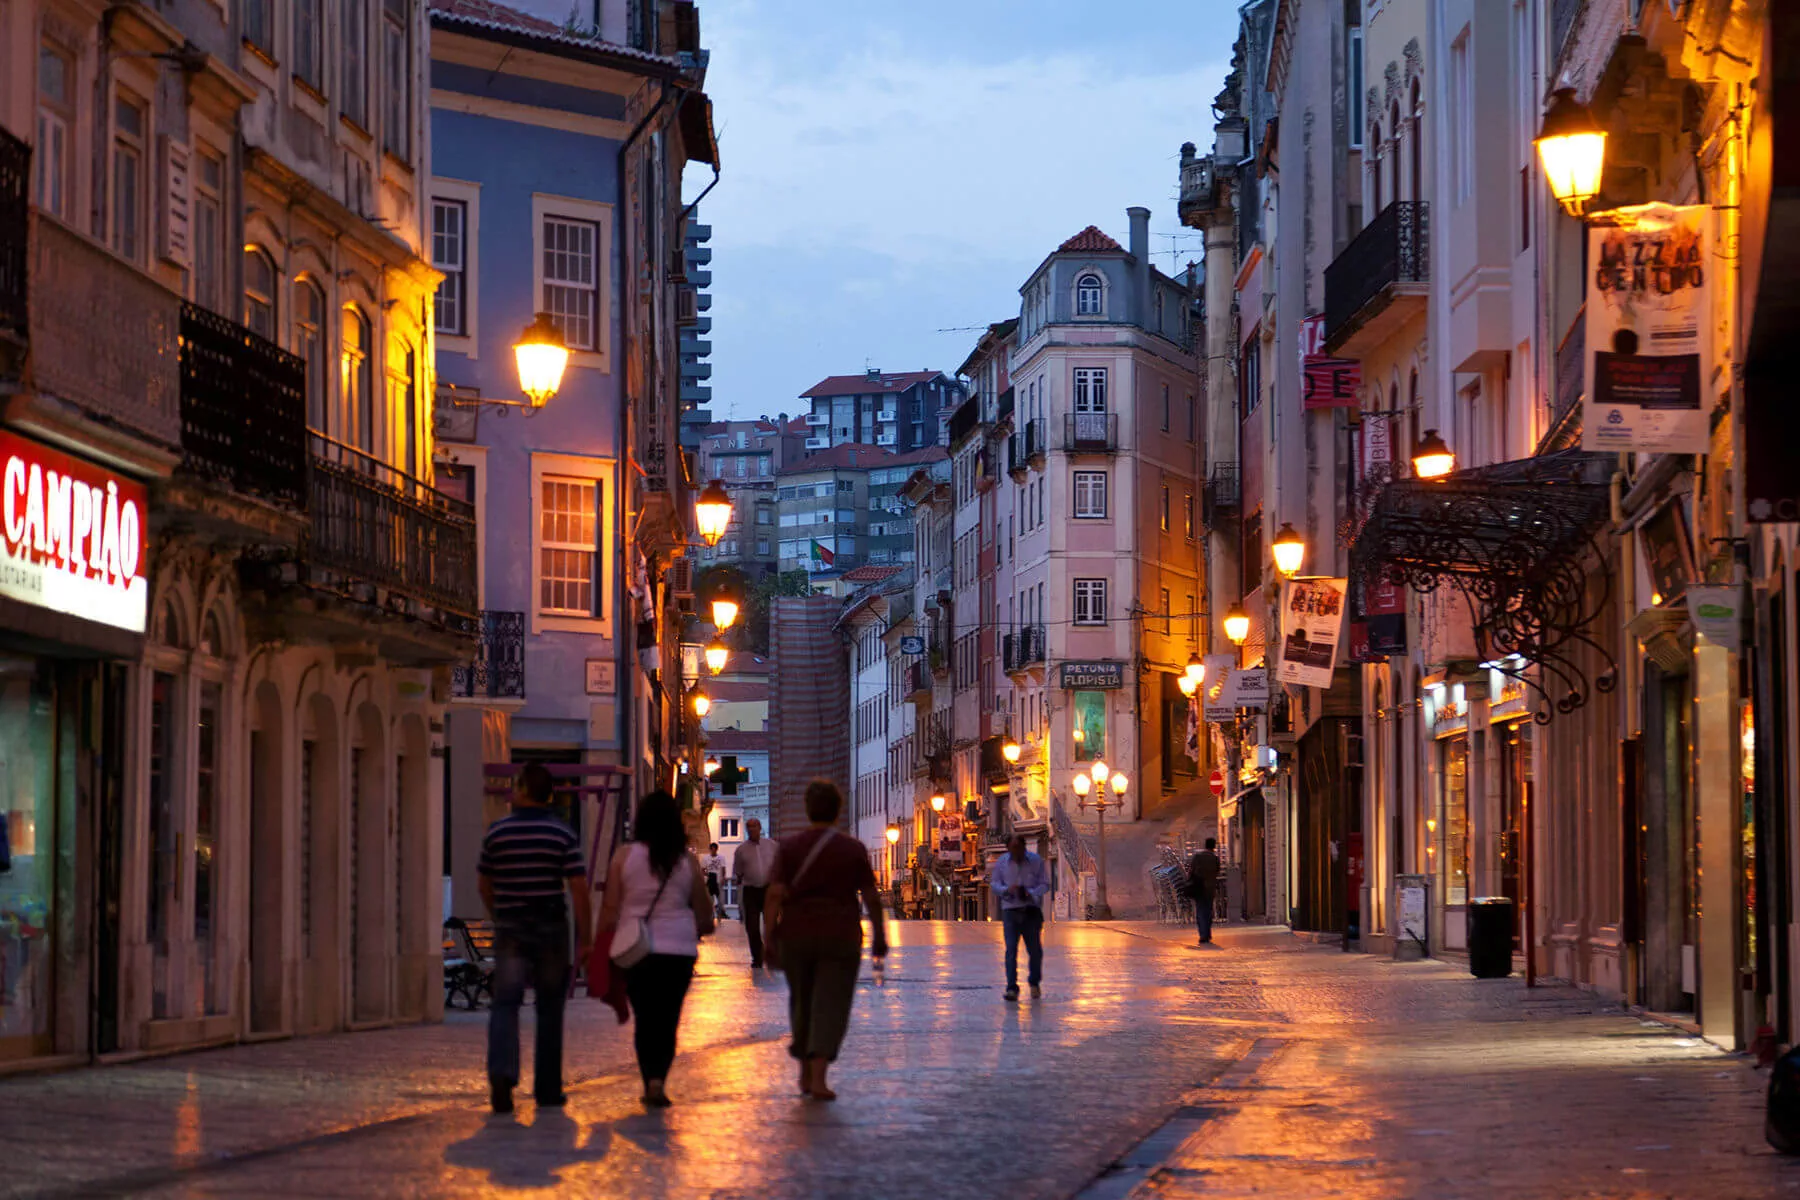 Coimbra’s main pedestrian drag, which divides the lower and upper parts of the old town, is a delight to explore